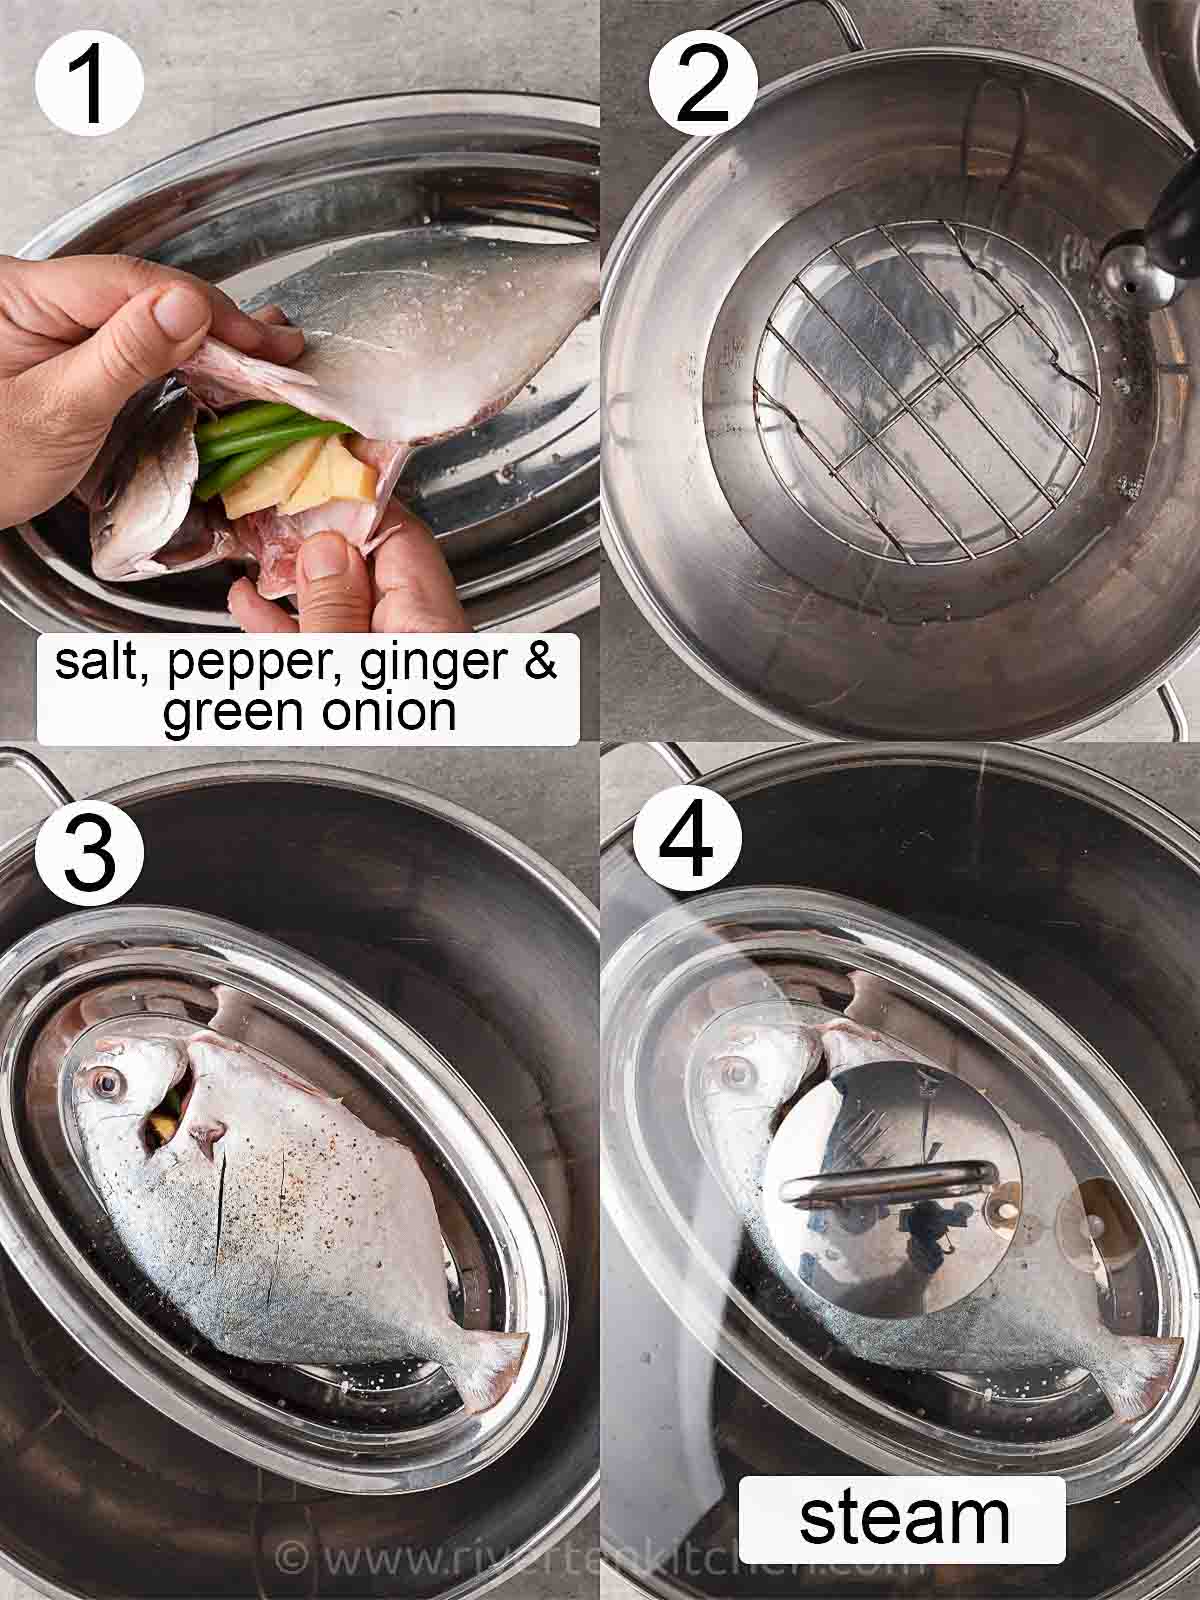 steps on how to steam fish with ginger and green onions.